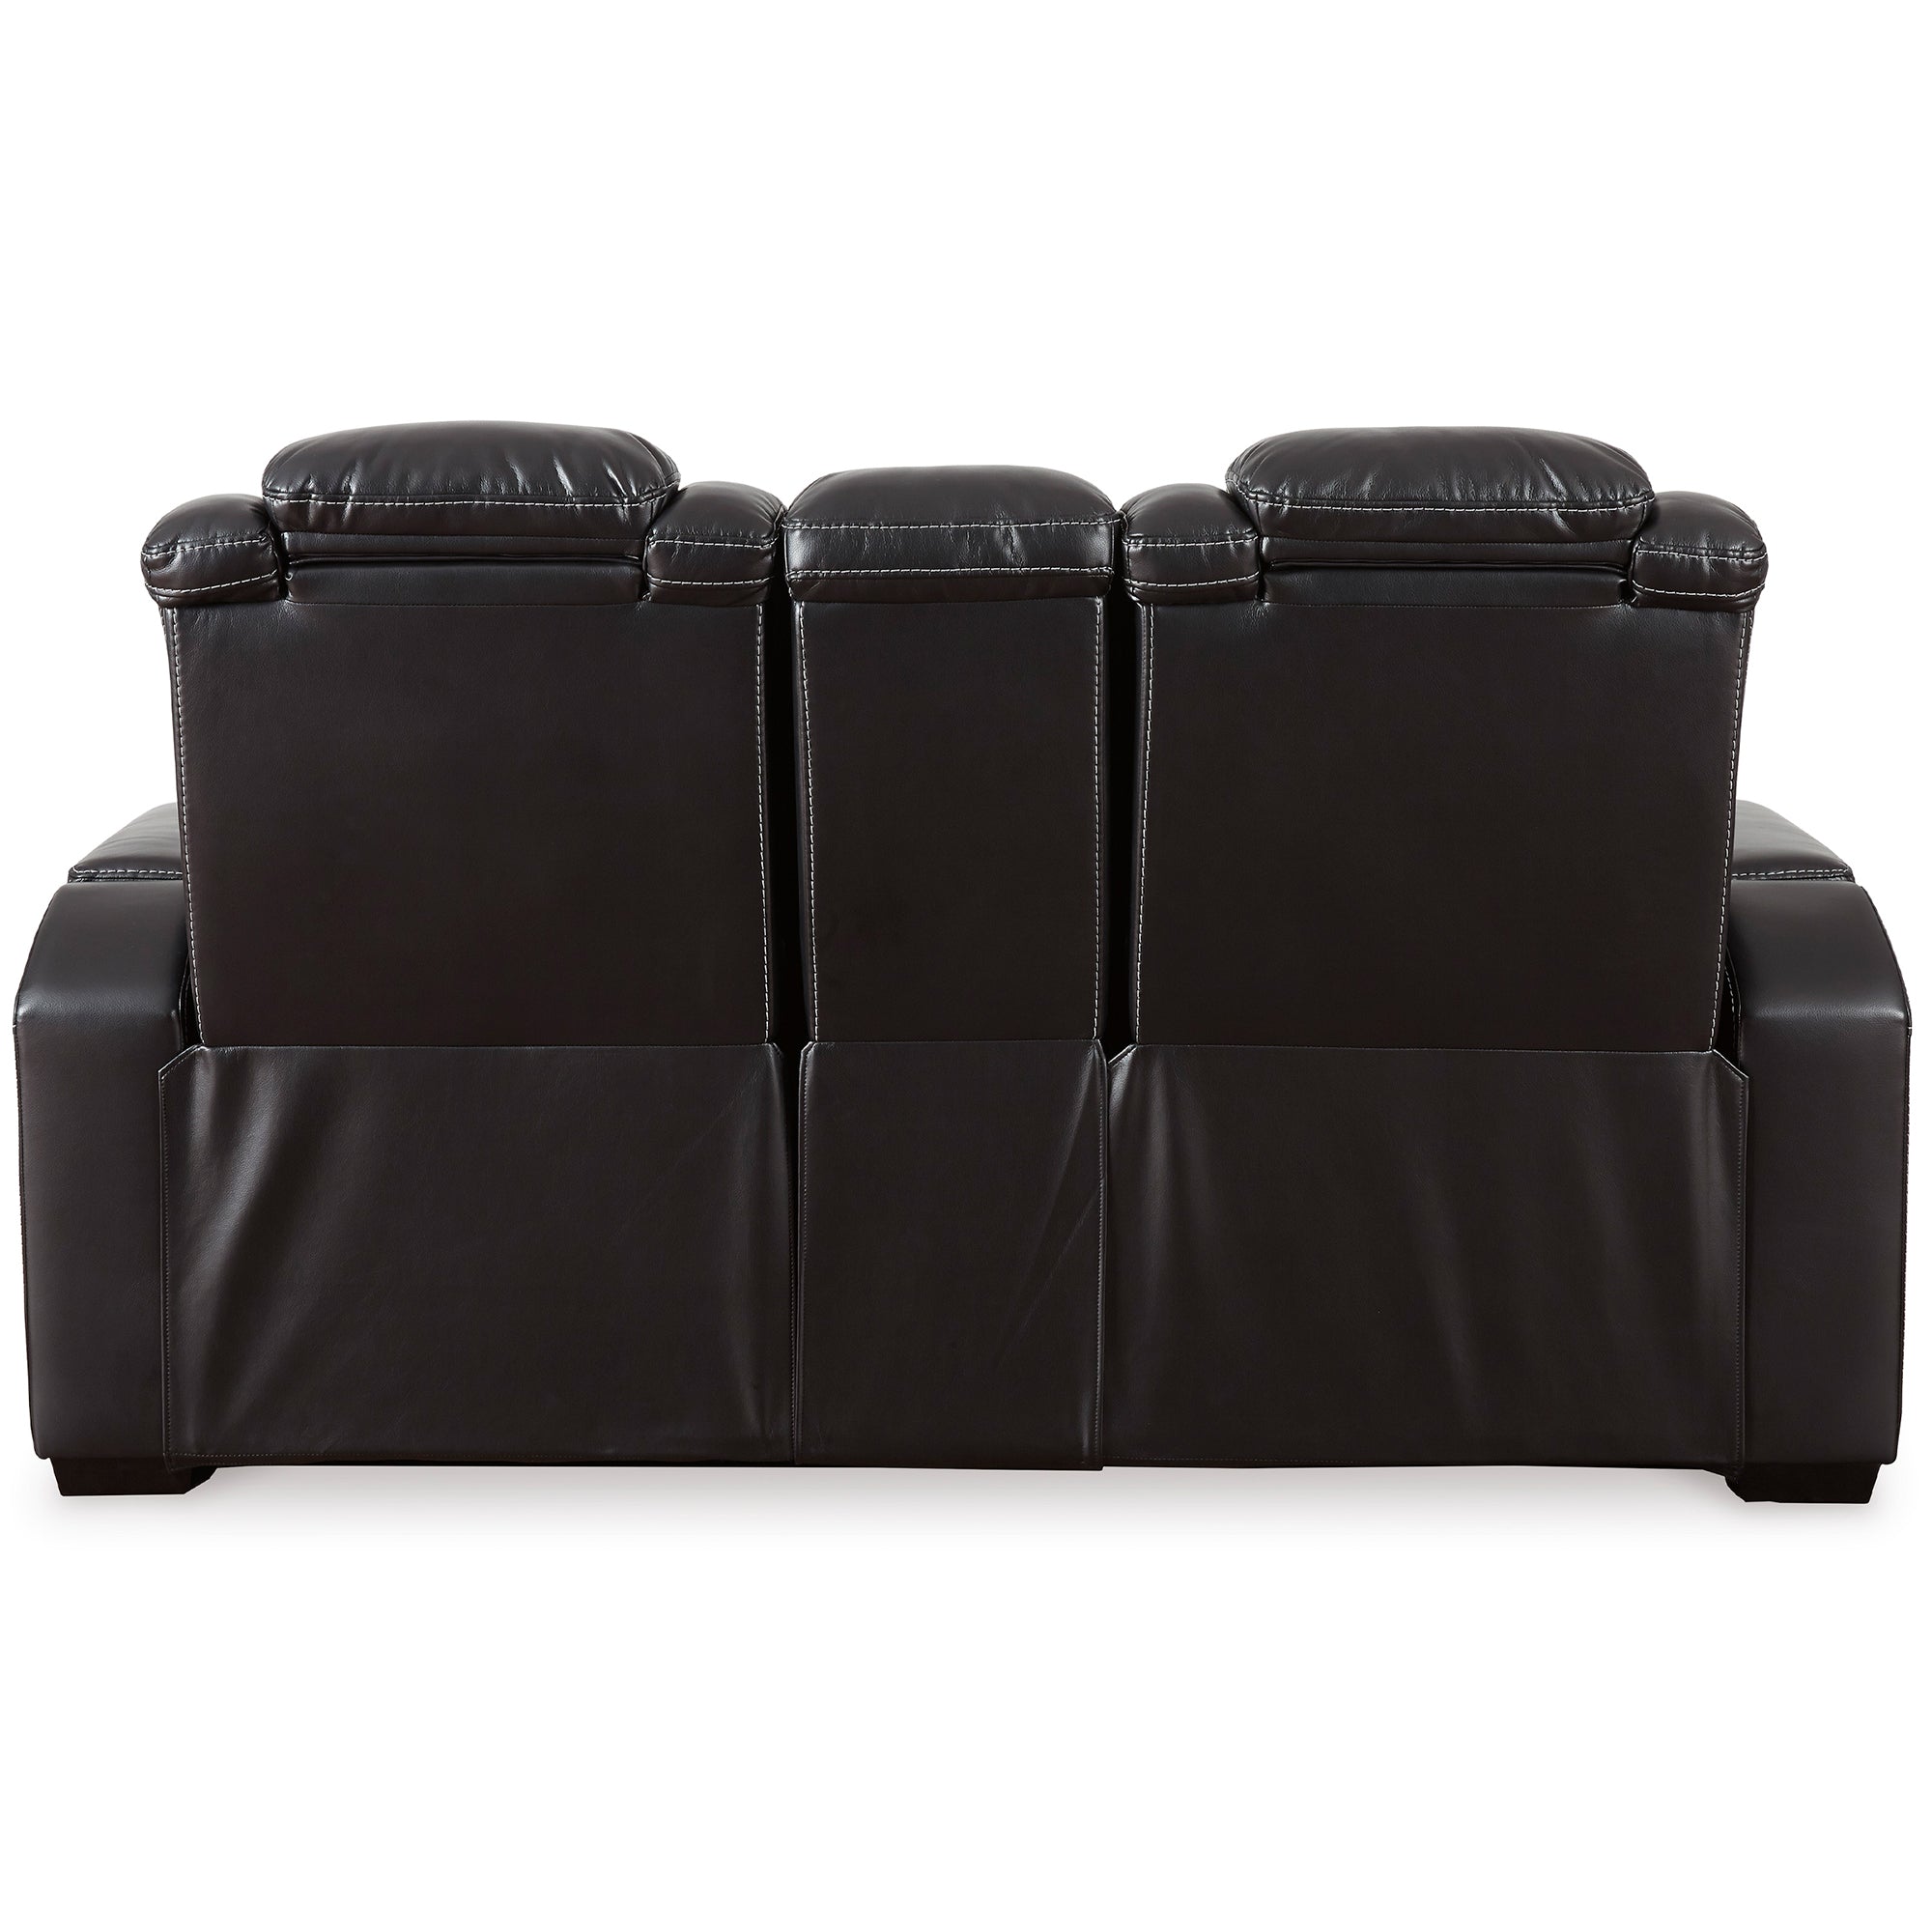 Party Time Dual Power Reclining Loveseat with Console